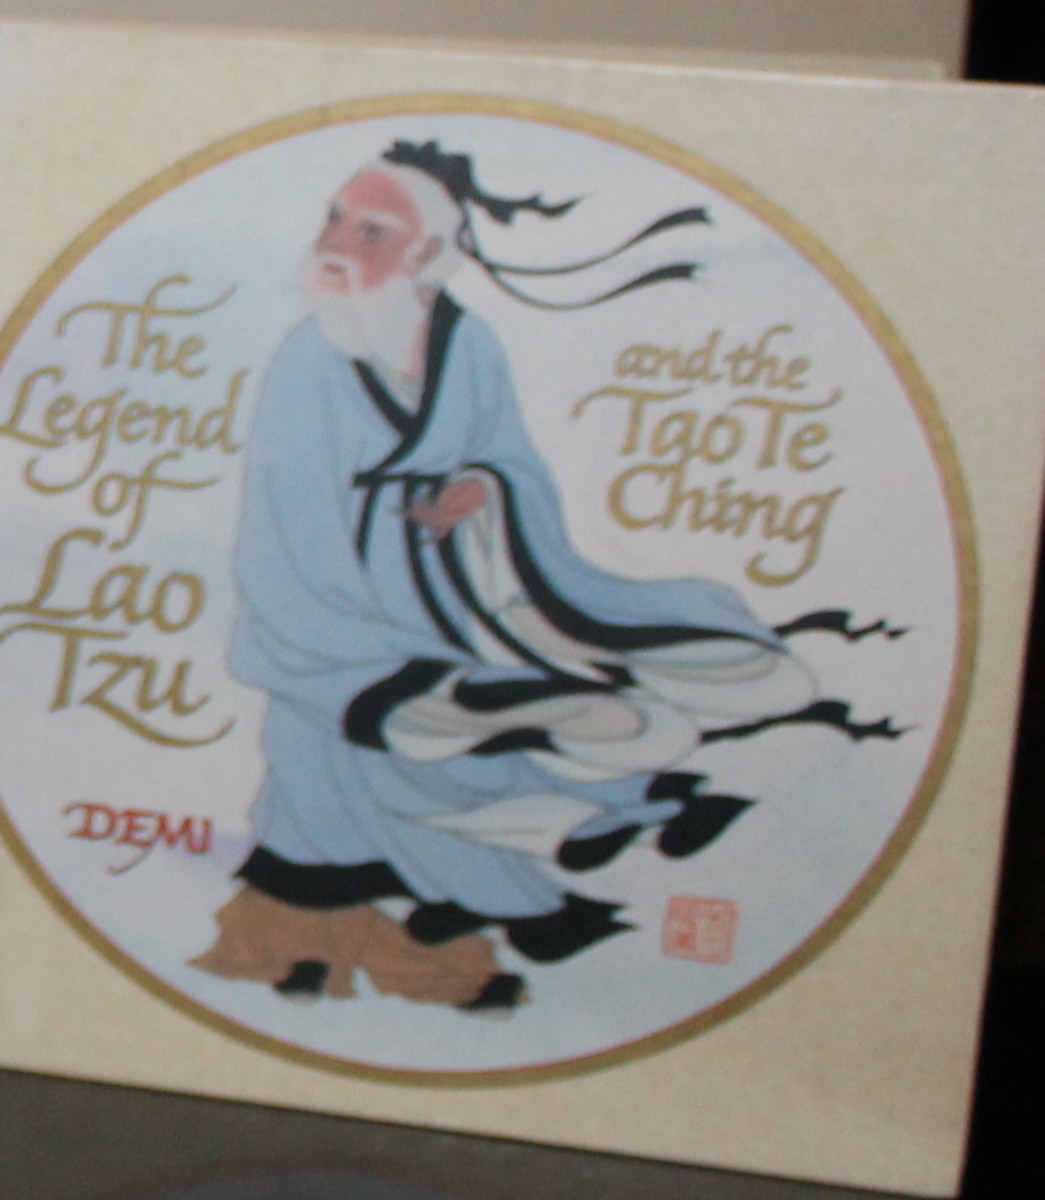 The Legend of Lao Tzu and the Tao Te Ching by Demi 